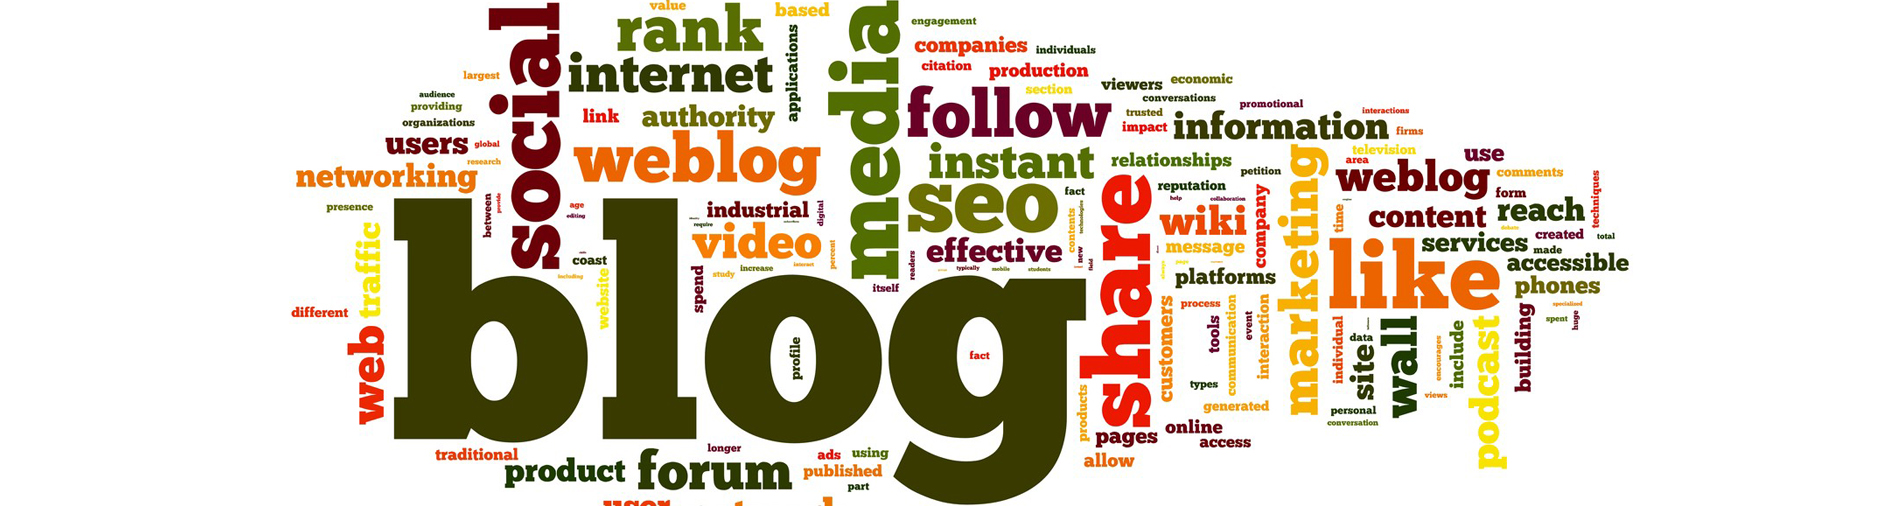 Blog to Increase Traffic and Conversions